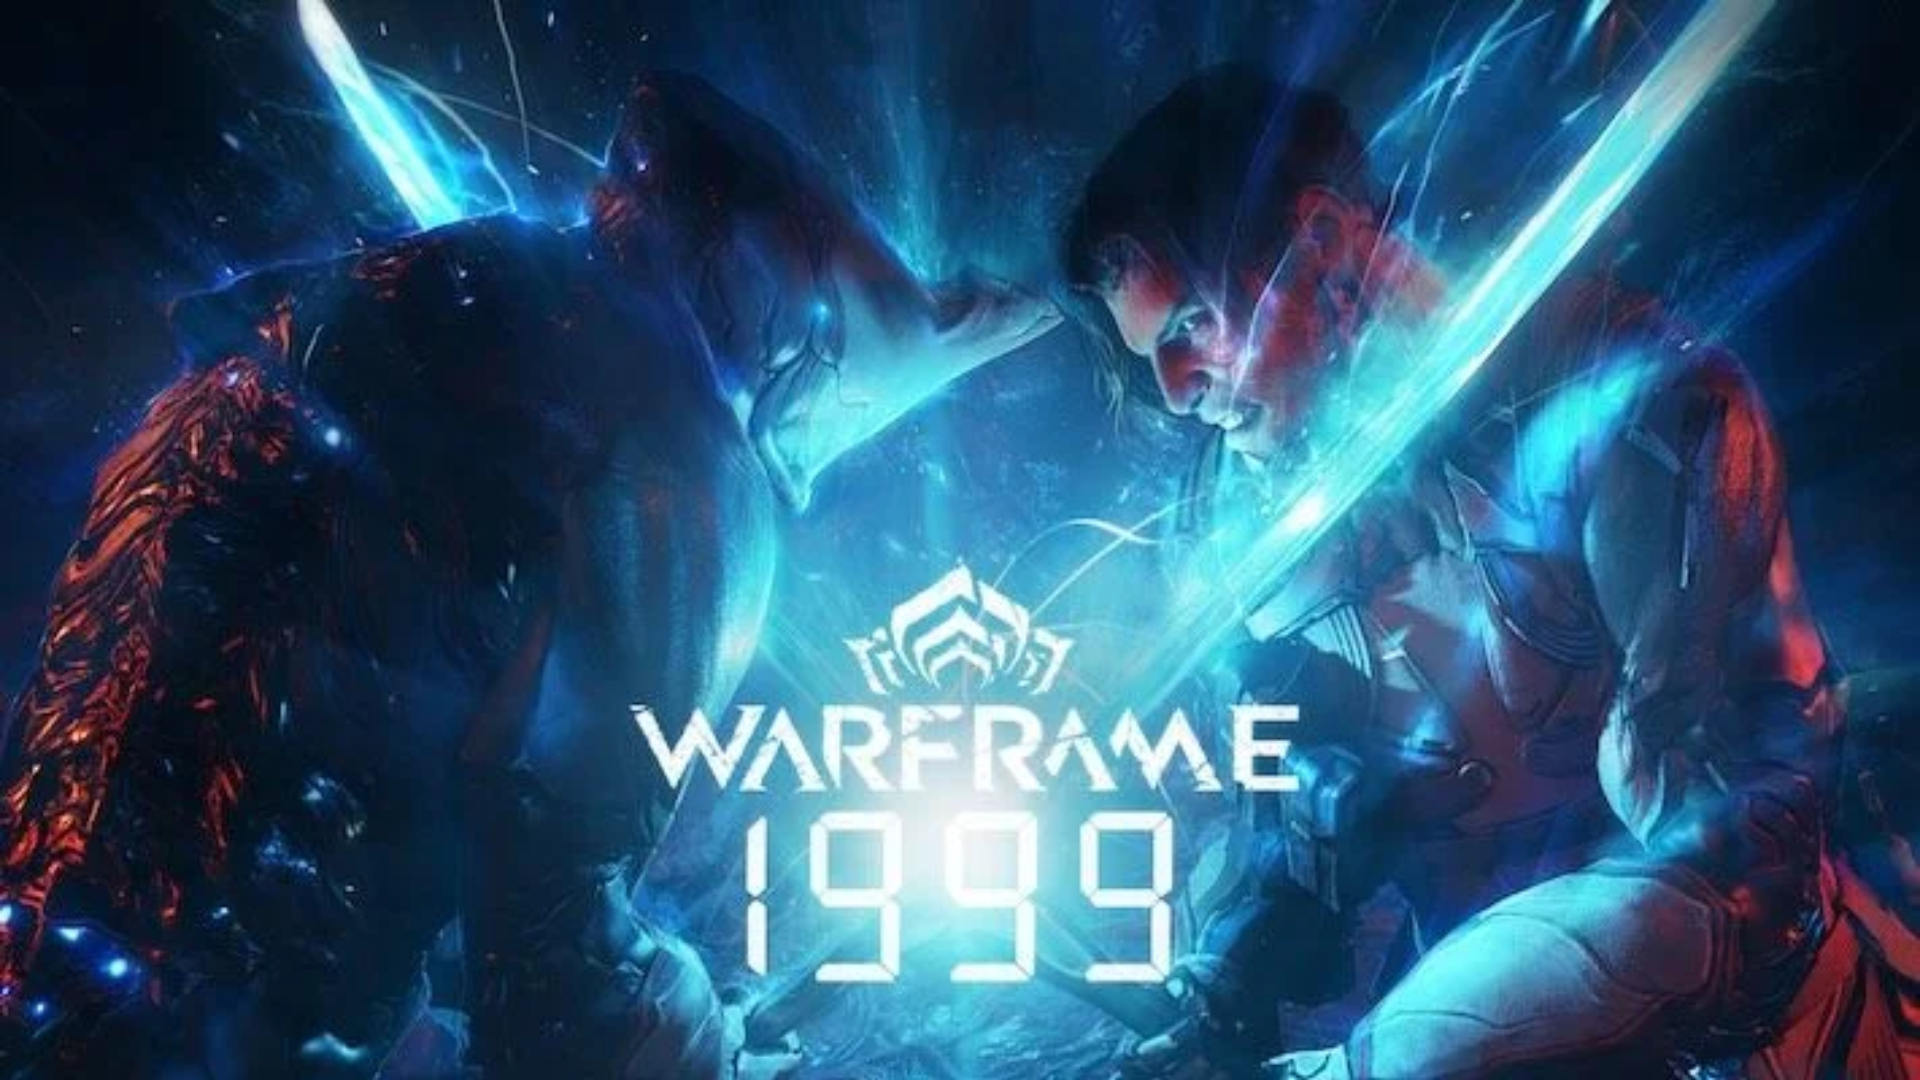 Warframe: 1999 Launches This Winter with Romance and Retro Thrills